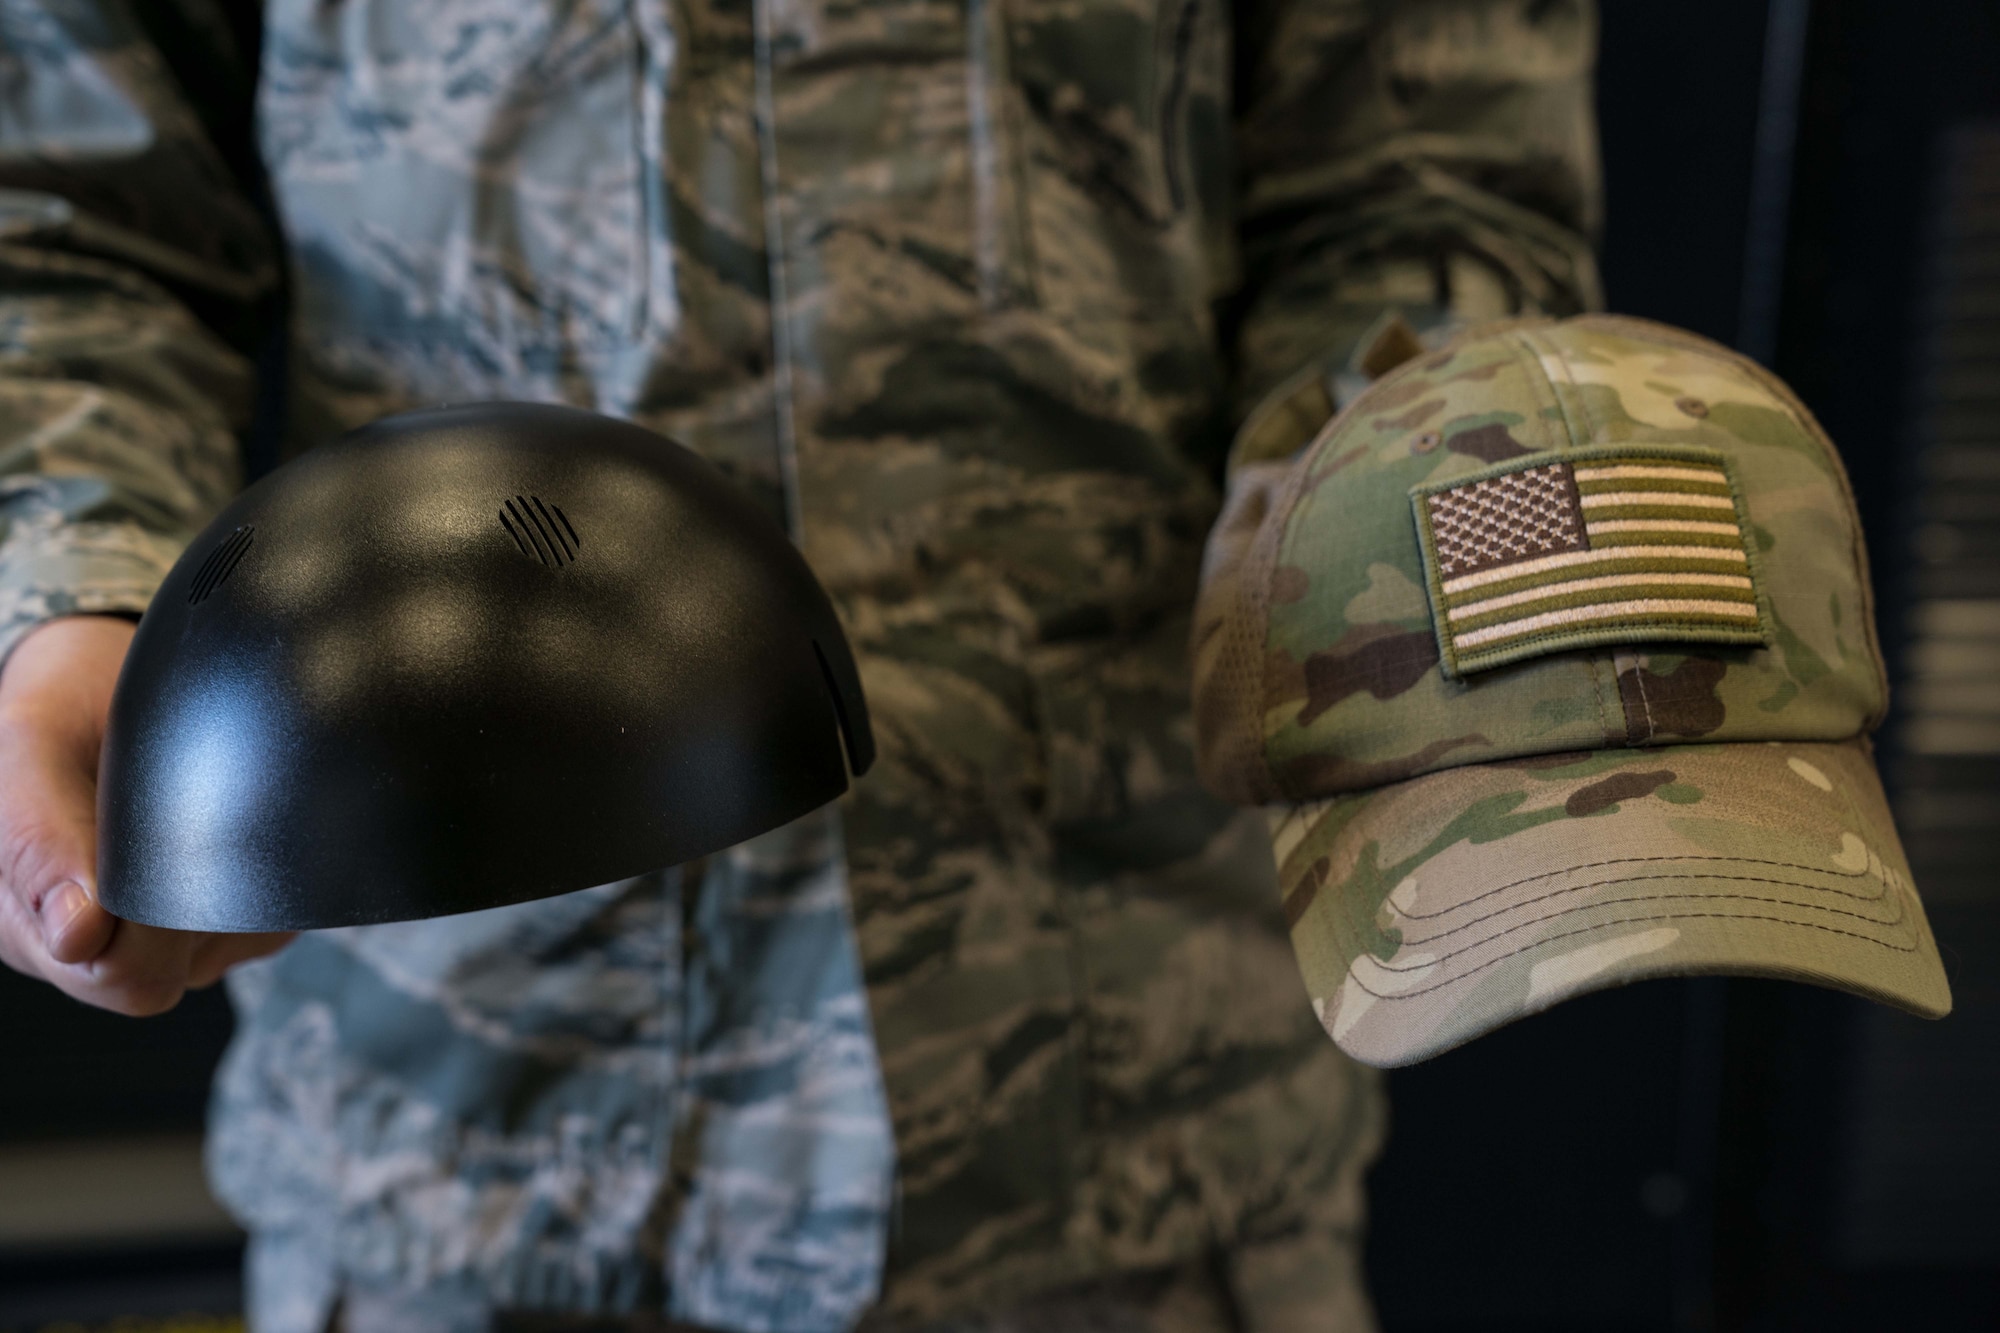 Tech. Sgt. Haisen Exon, 90th Missile Maintenance Squadron, Facilities Maintenance Section, support section NCOIC, shows the bump cap insert and how it inserts into a normal cap on F.E. Warren AFB, Wyoming, Nov. 18, 2019. He teams up with the 90th Missile Wing LaunchWerx agency to bring forward an idea to prevent future head injuries across the wing. (U.S. Air Force photo by Joseph Coslett)